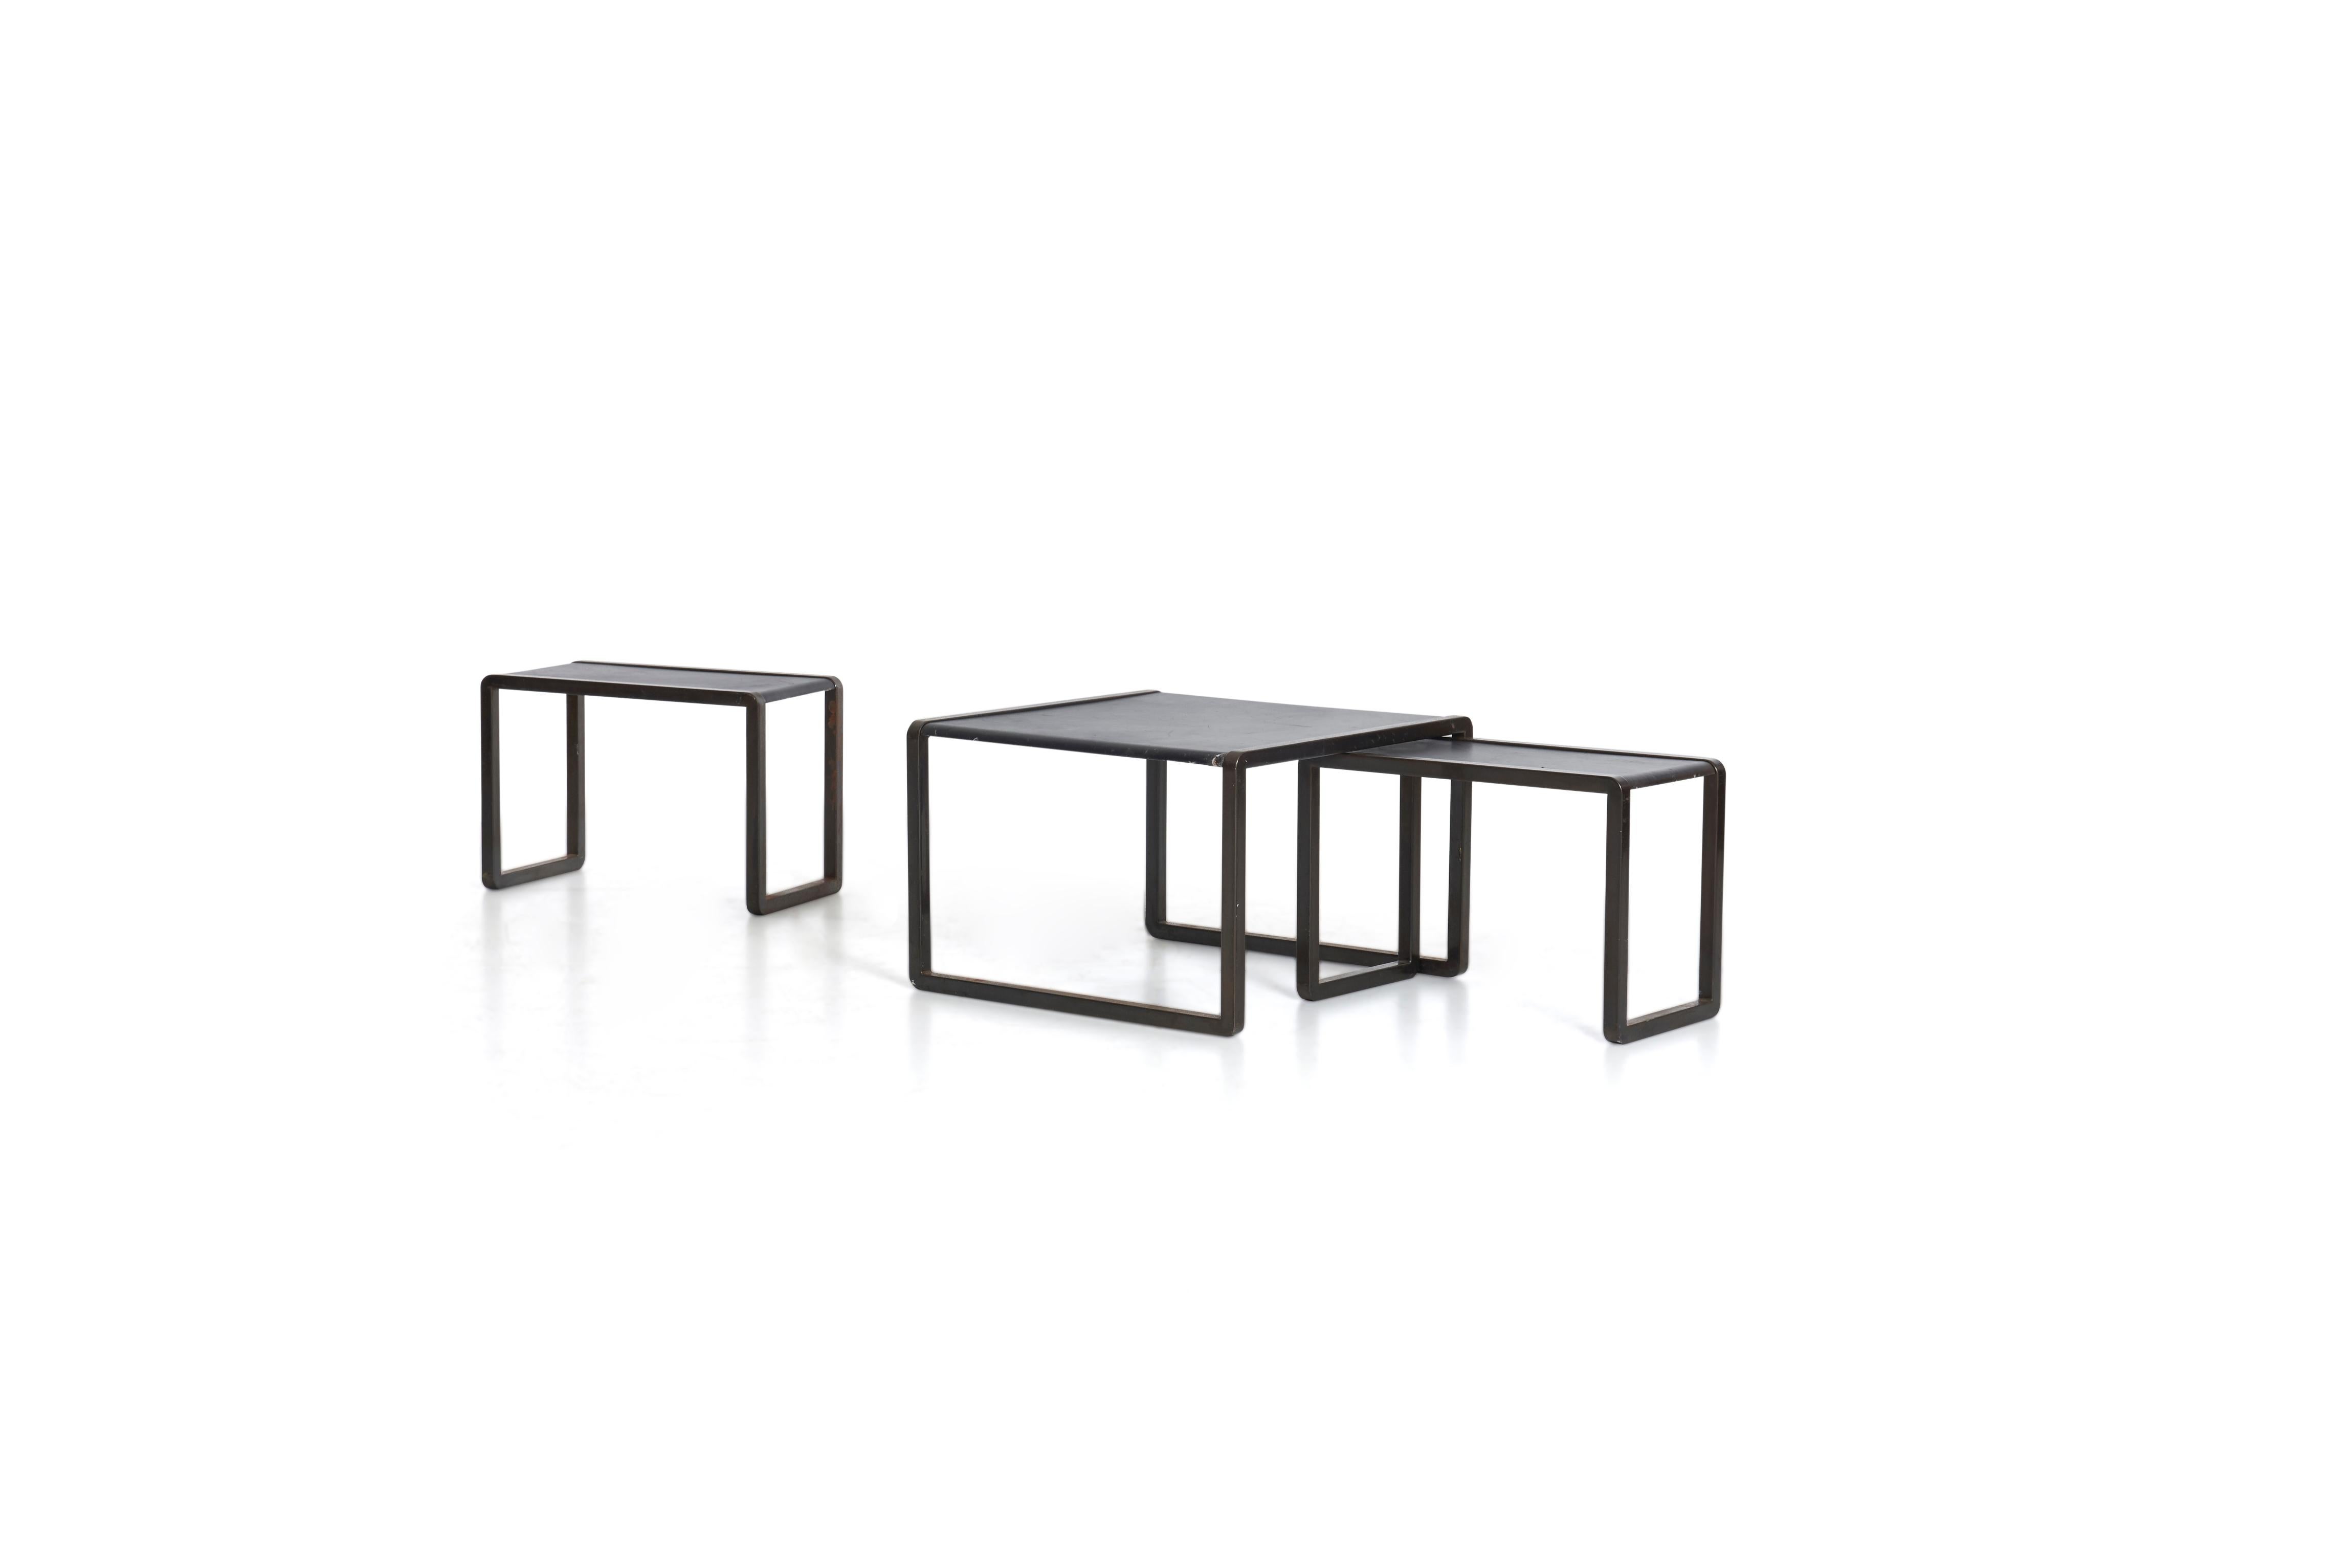 Marco Fantoni for Tecno, these unique nesting tables were designed for Borsani Commission. Bronze painted metal with leather tops.
Measures: Height of largest table 16